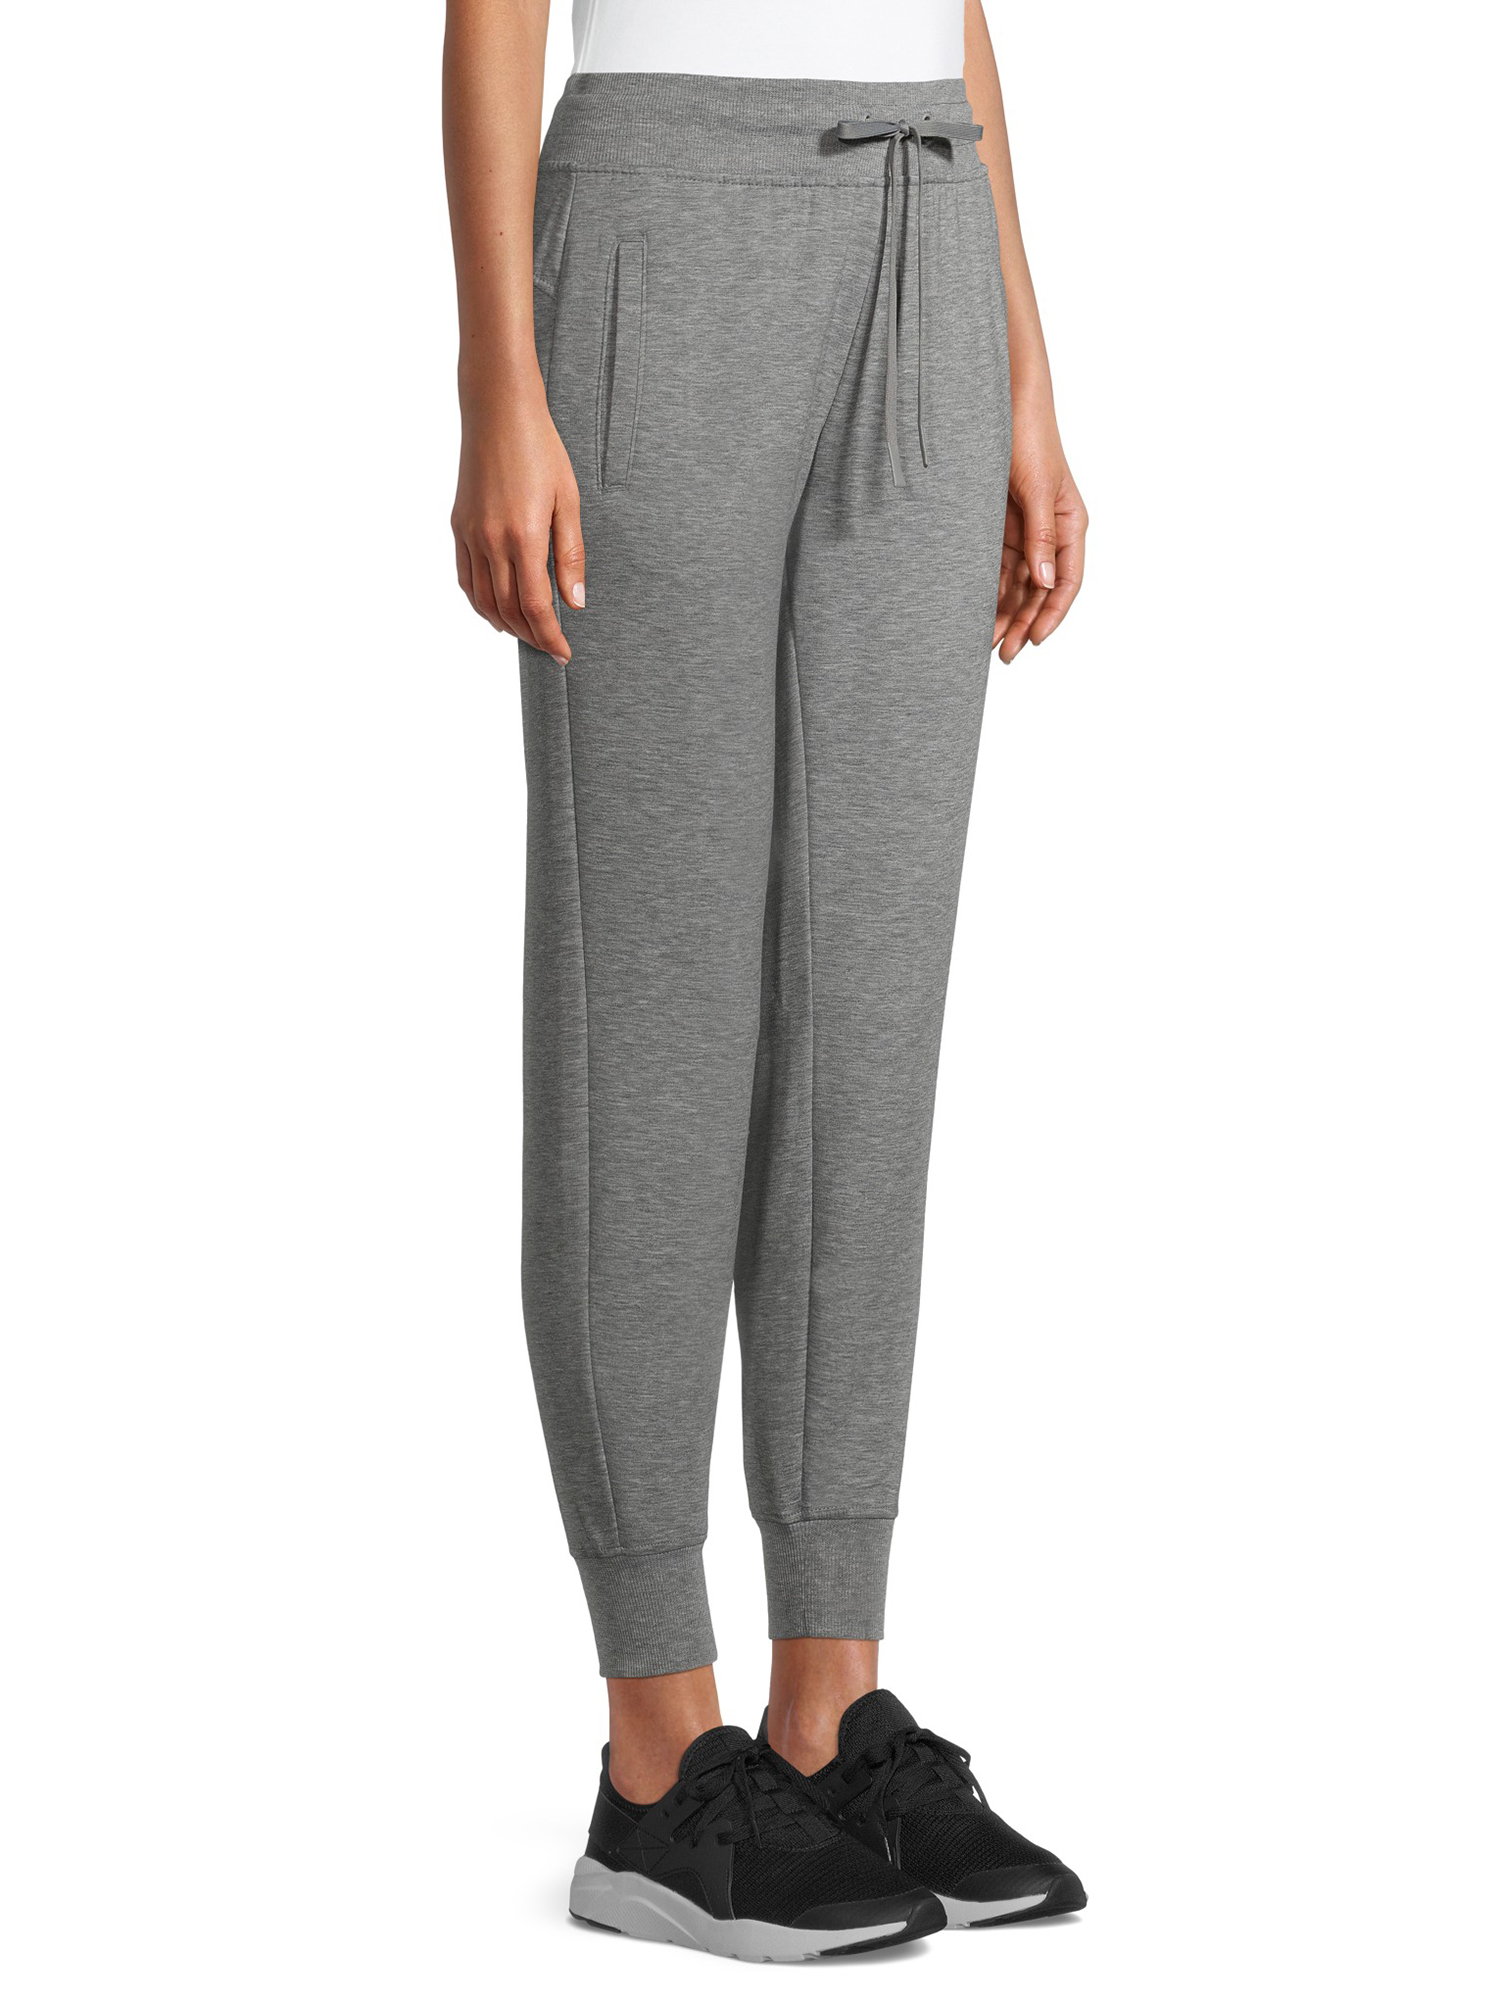 Athletic Works Women's Athleisure Soft Jogger Pants - image 5 of 6